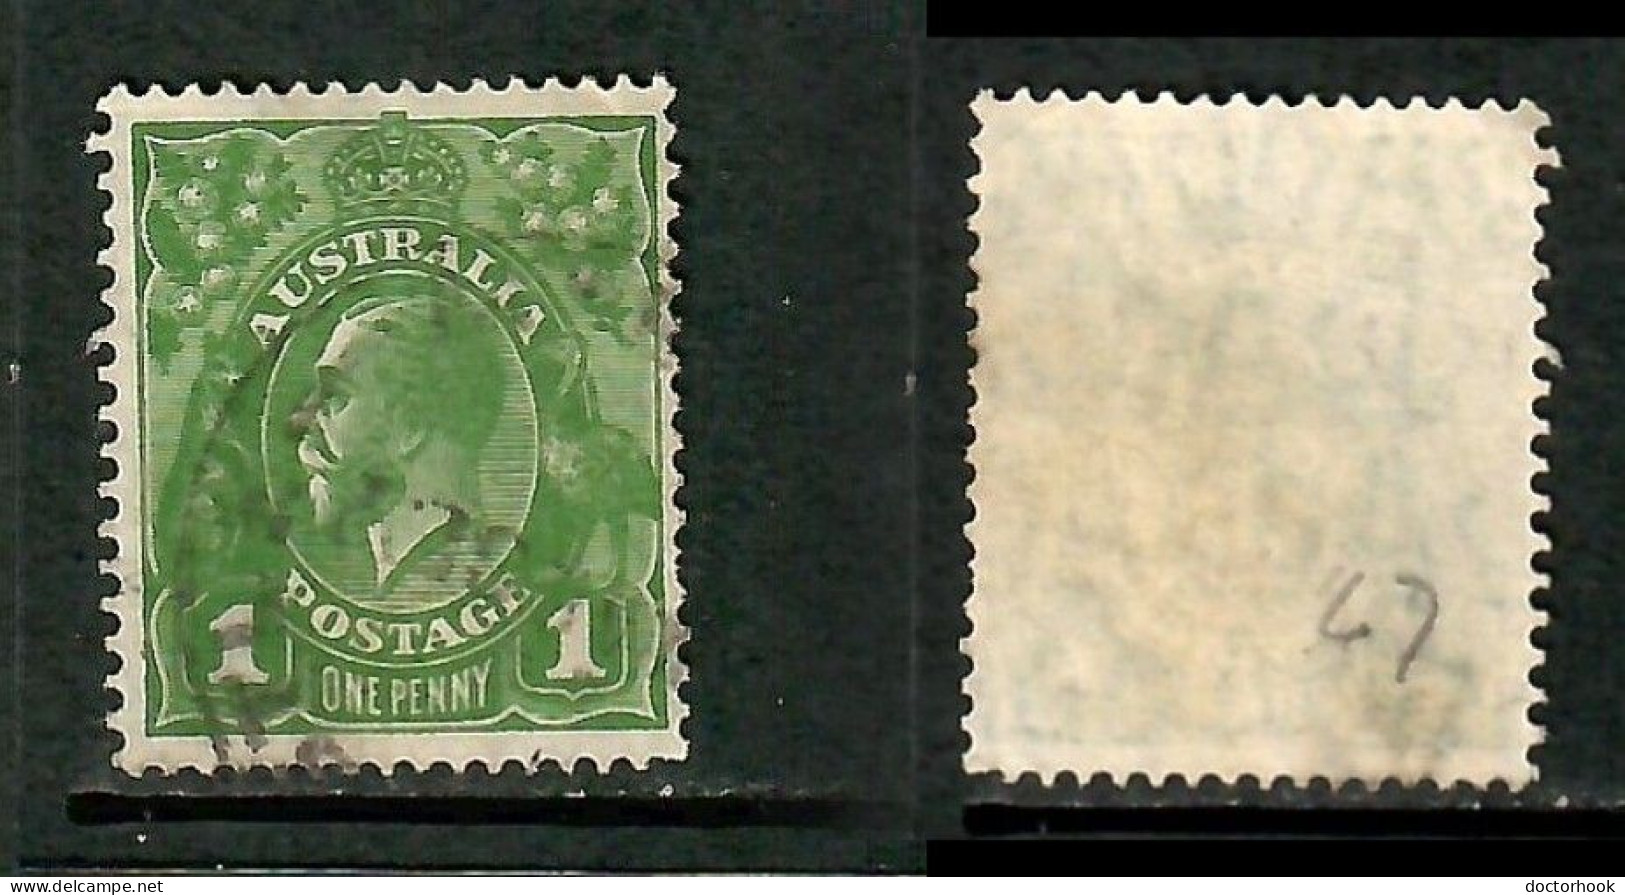 AUSTRALIA   Scott # 67 USED (CONDITION AS PER SCAN) (Stamp Scan # 1001-5) - Used Stamps